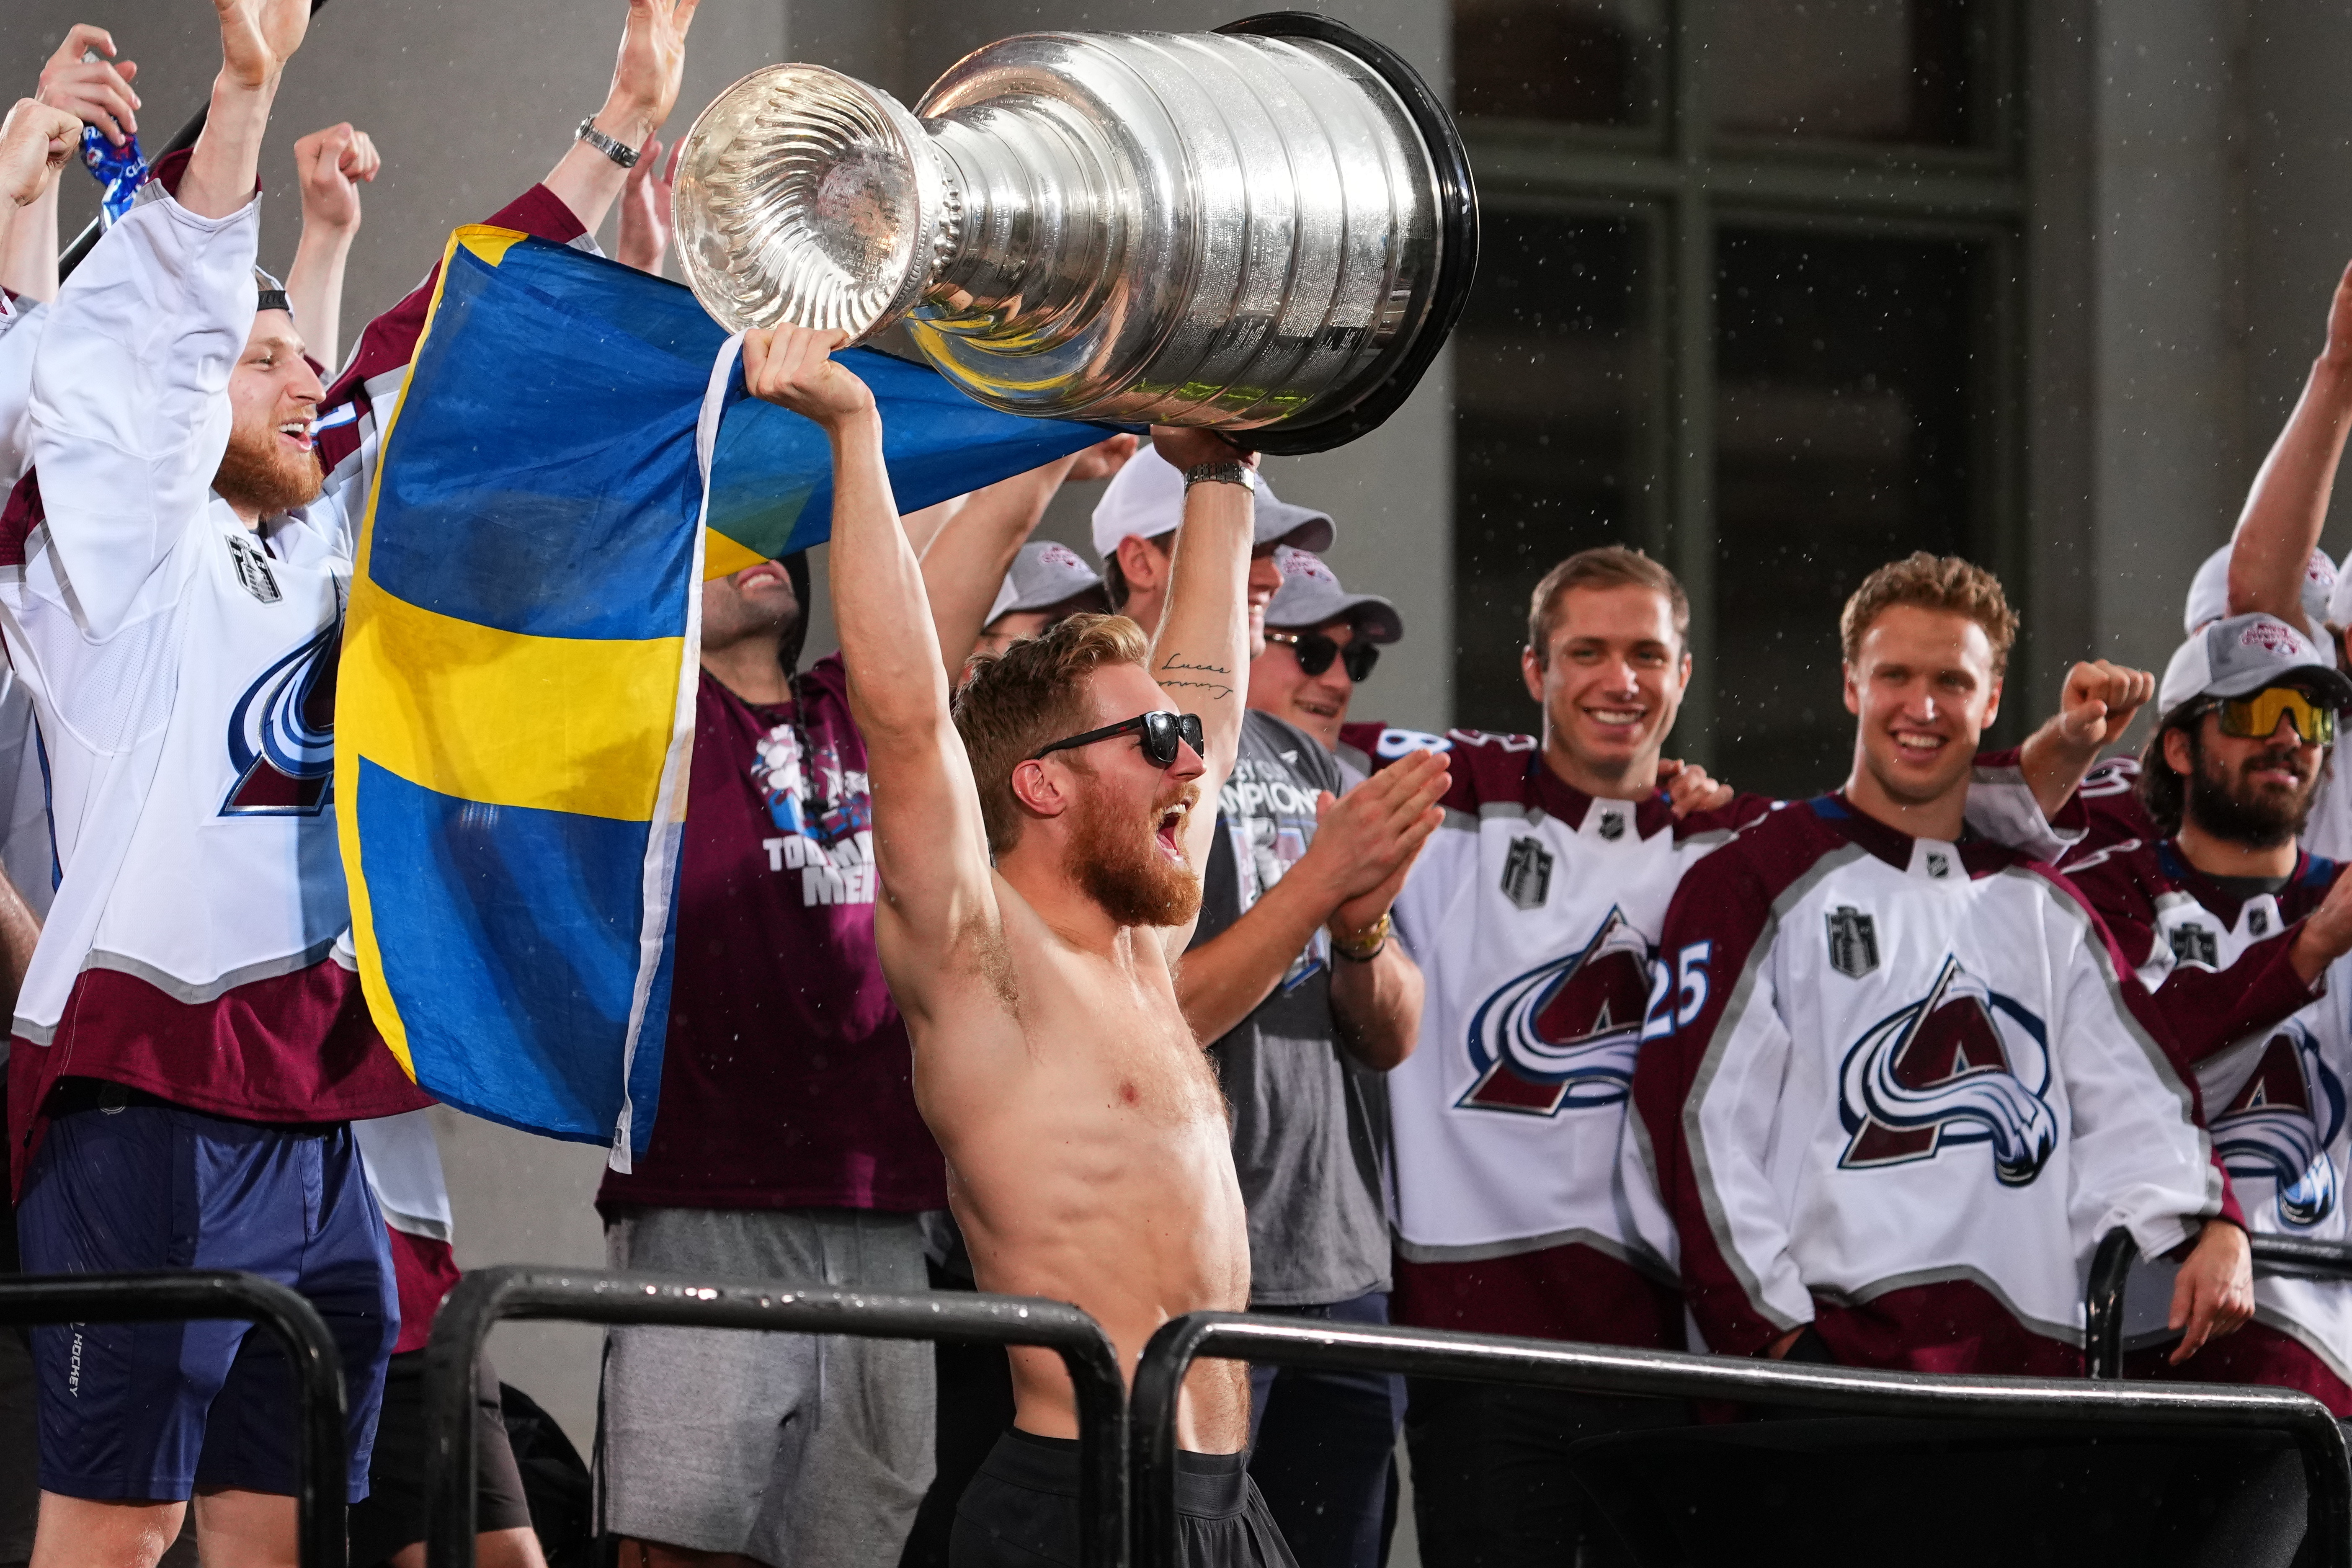 Best Colorado Avalanche Stanley Cup Moments